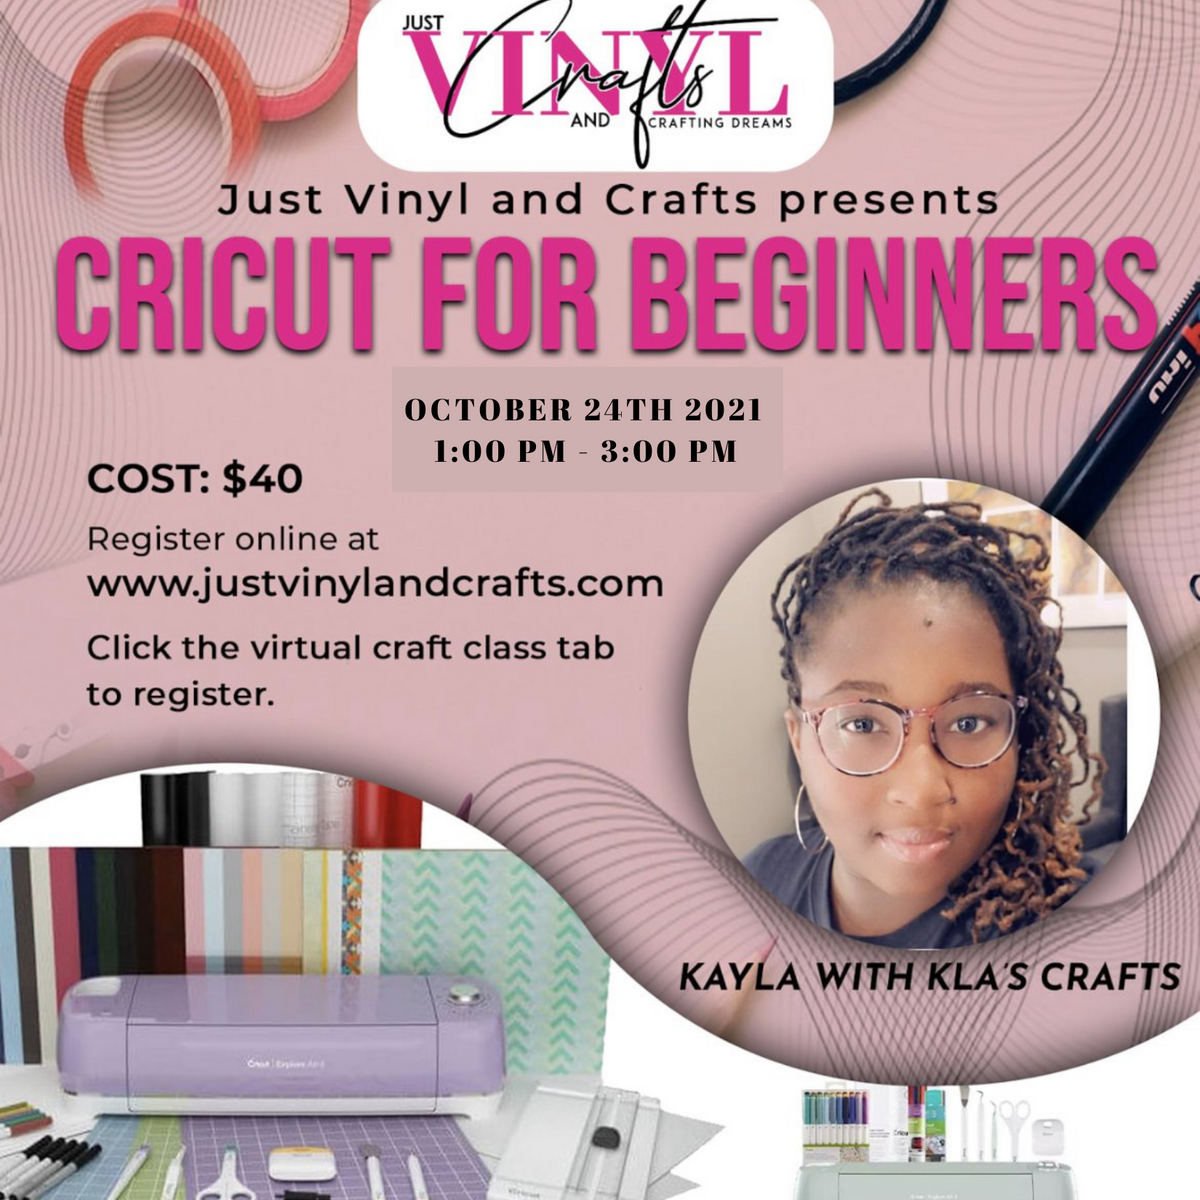 Types Of Vinyl For Cricut - Cricut Coaching and Crafting